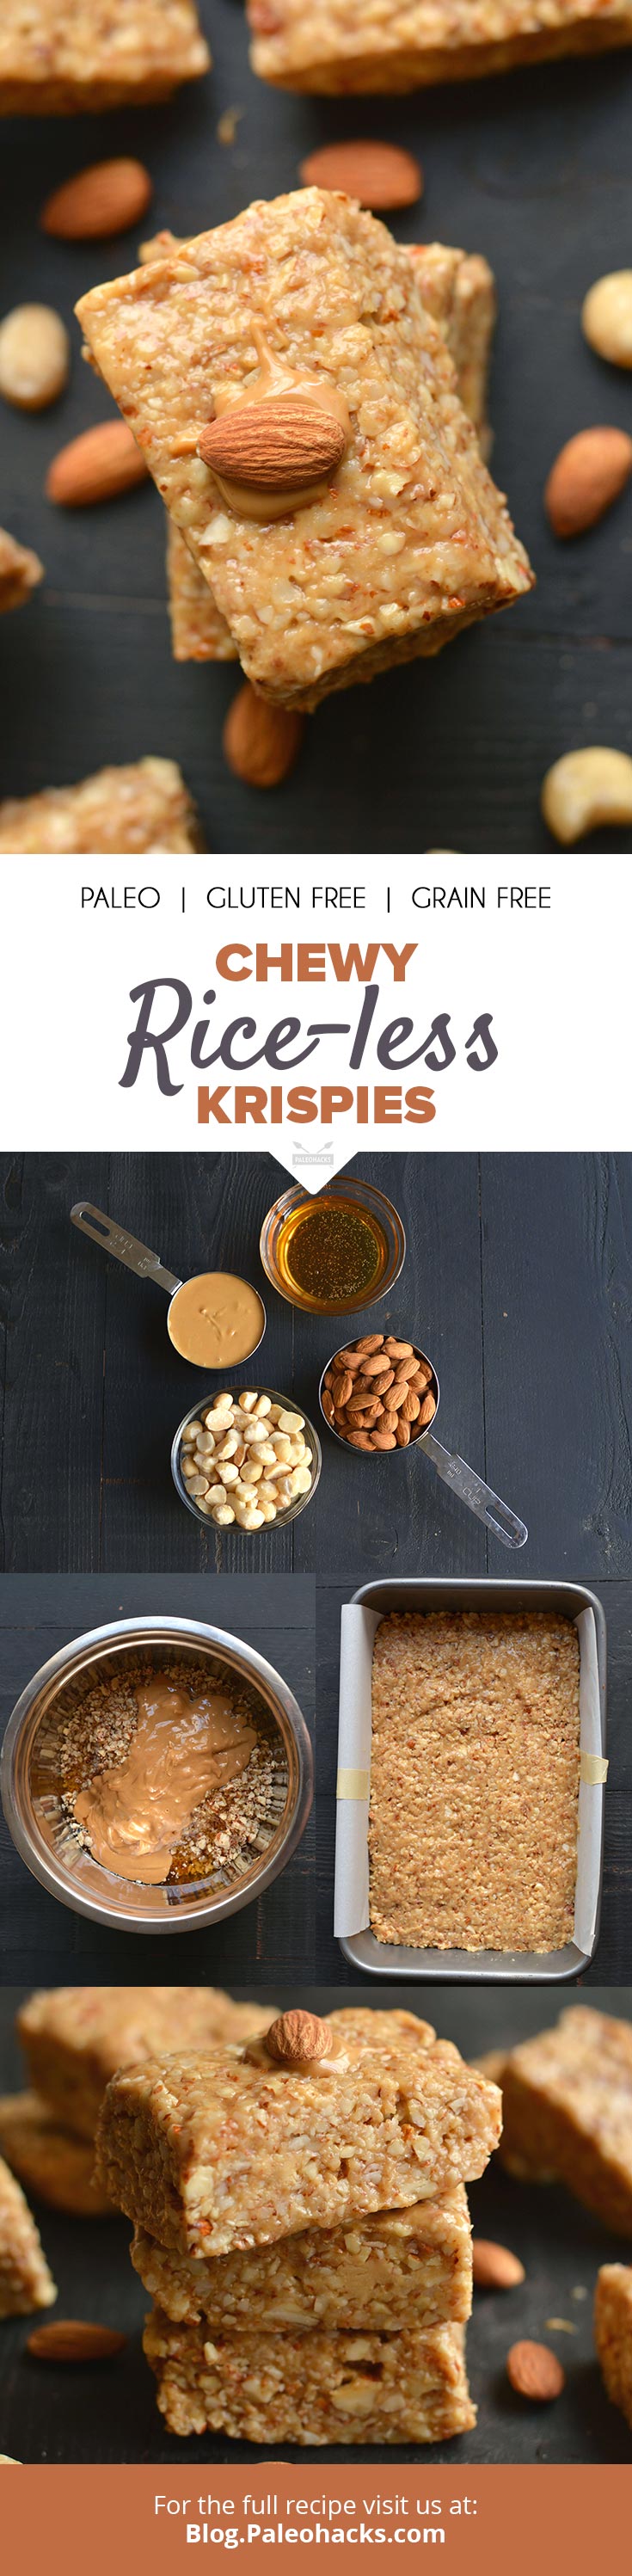 Smooth, buttery and chewy, these Rice-less Krispies - inspired treats are made with only 4 ingredients. High in protein and fat, gluten free and grain free.